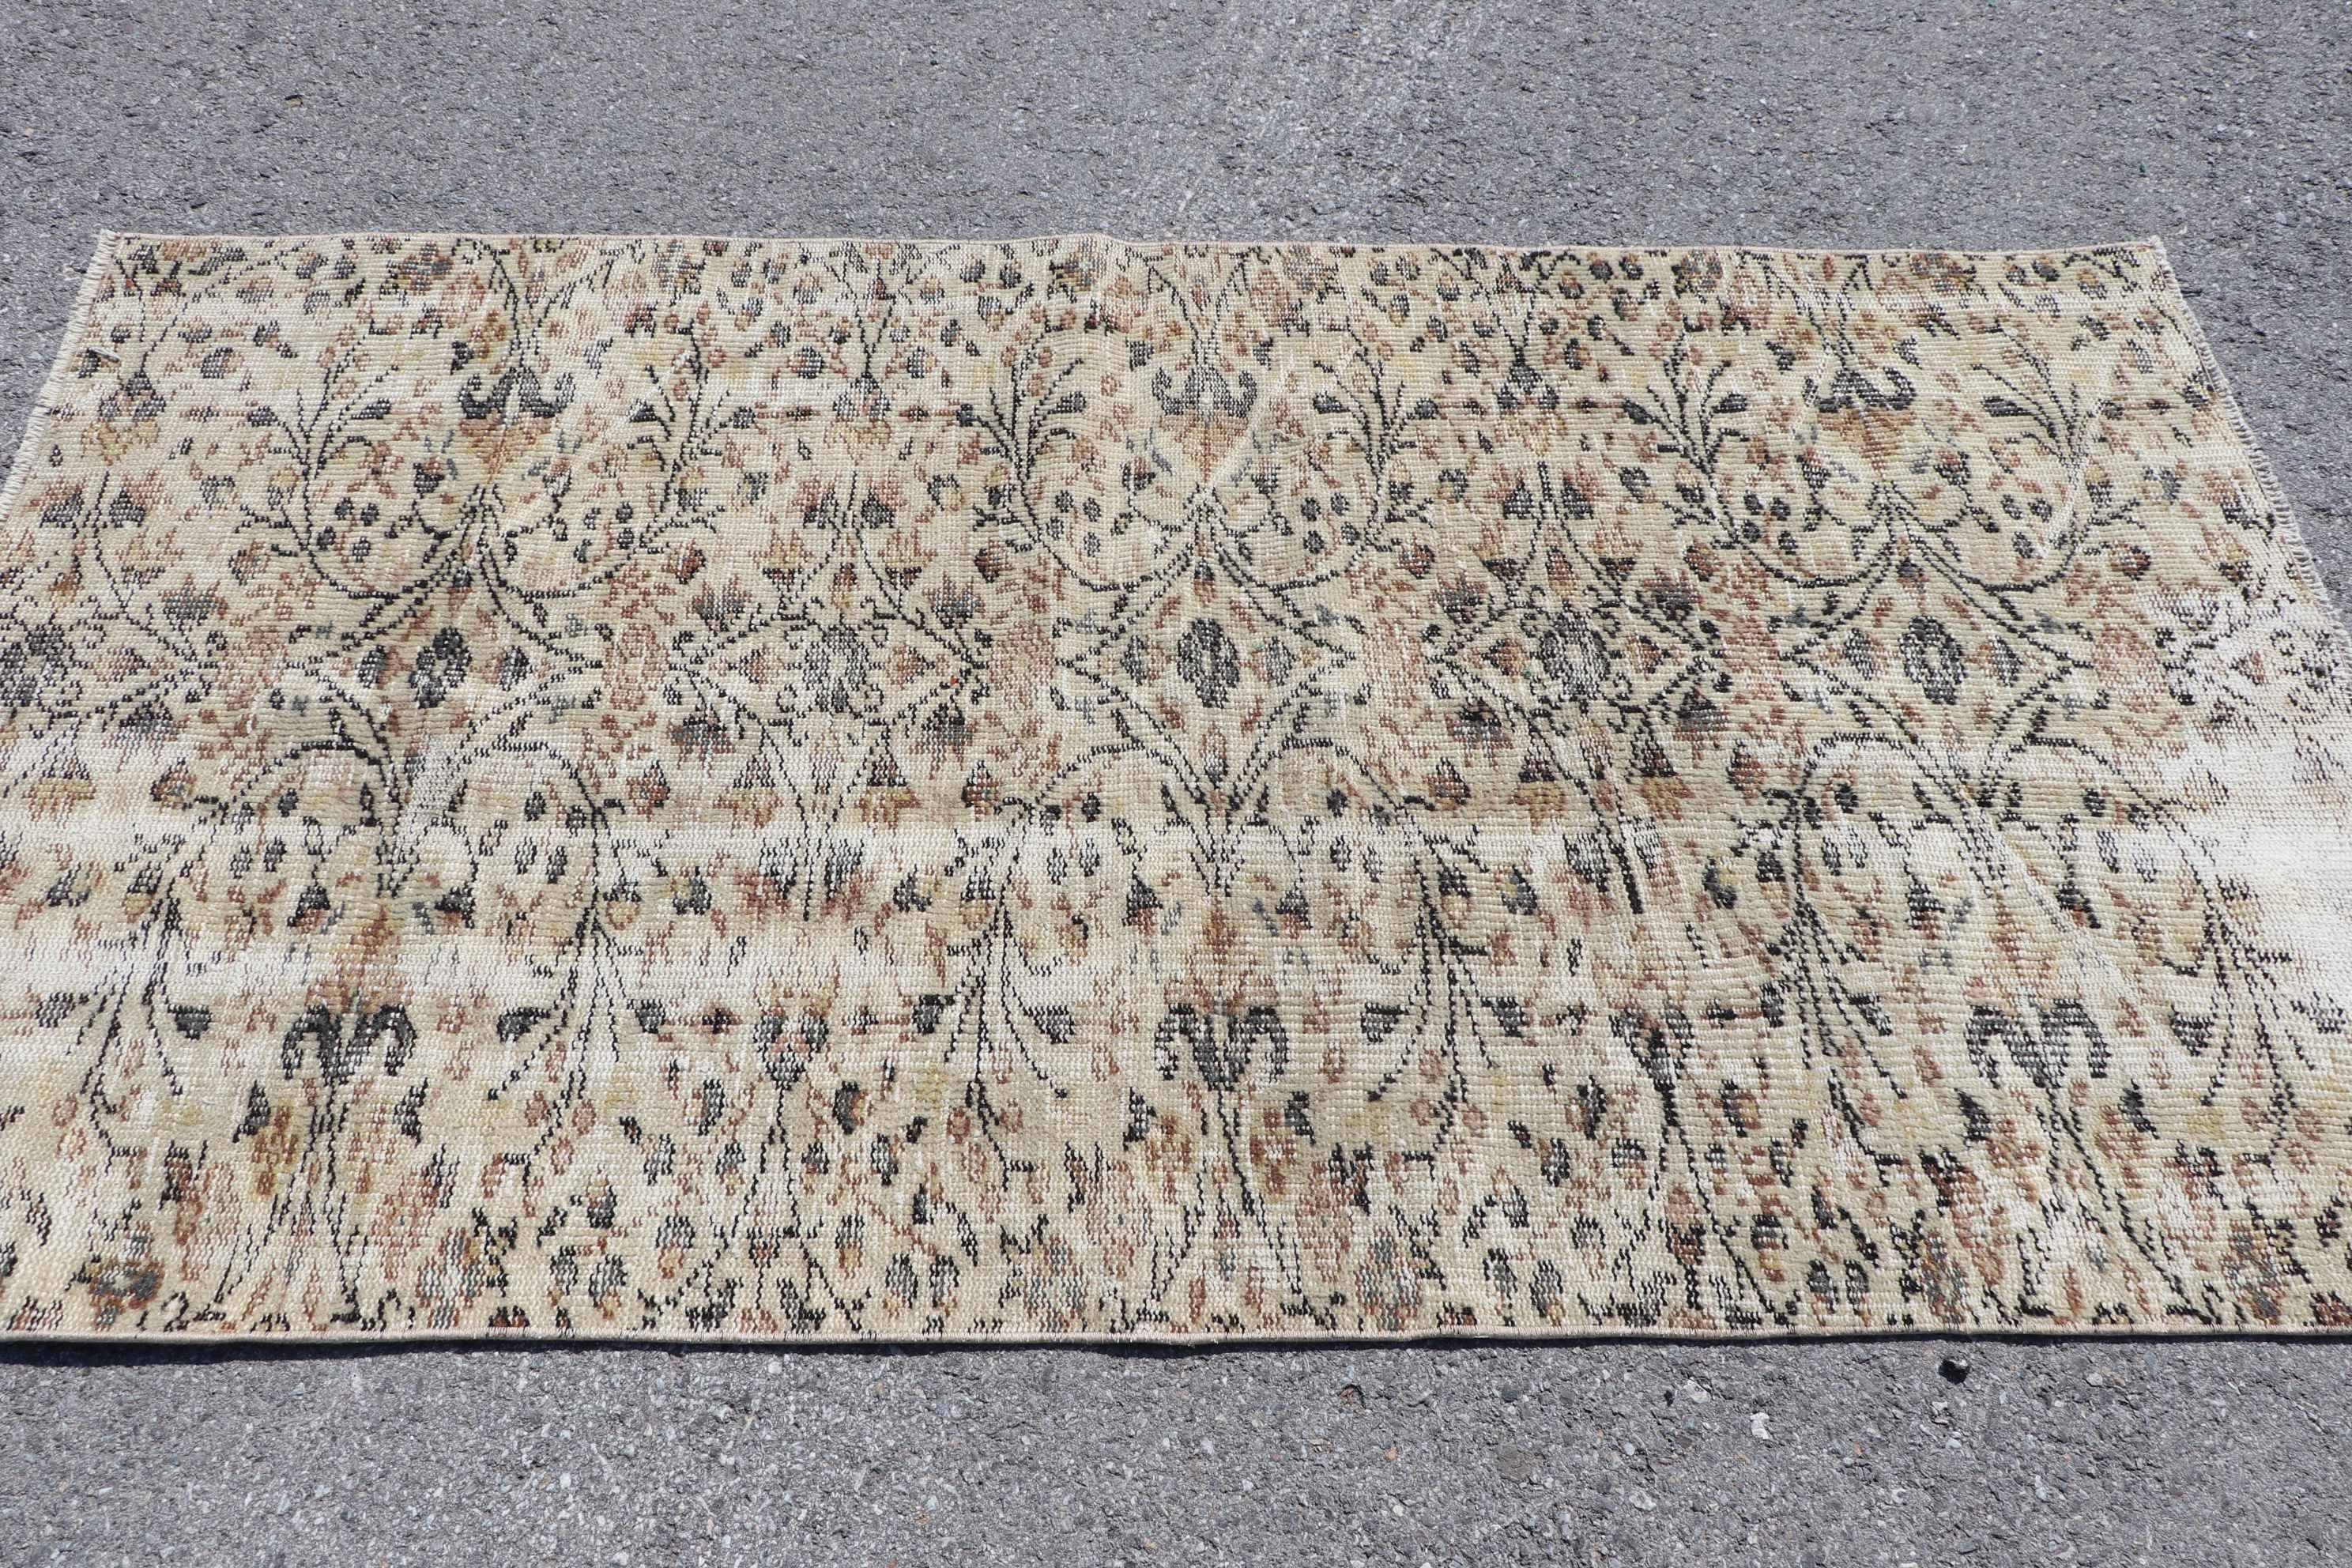 Turkish Rugs, Brown Anatolian Rug, Turkey Rug, Bedroom Rug, Entry Rugs, Vintage Rug, 3.5x6.5 ft Accent Rug, Antique Rugs, Kitchen Rug